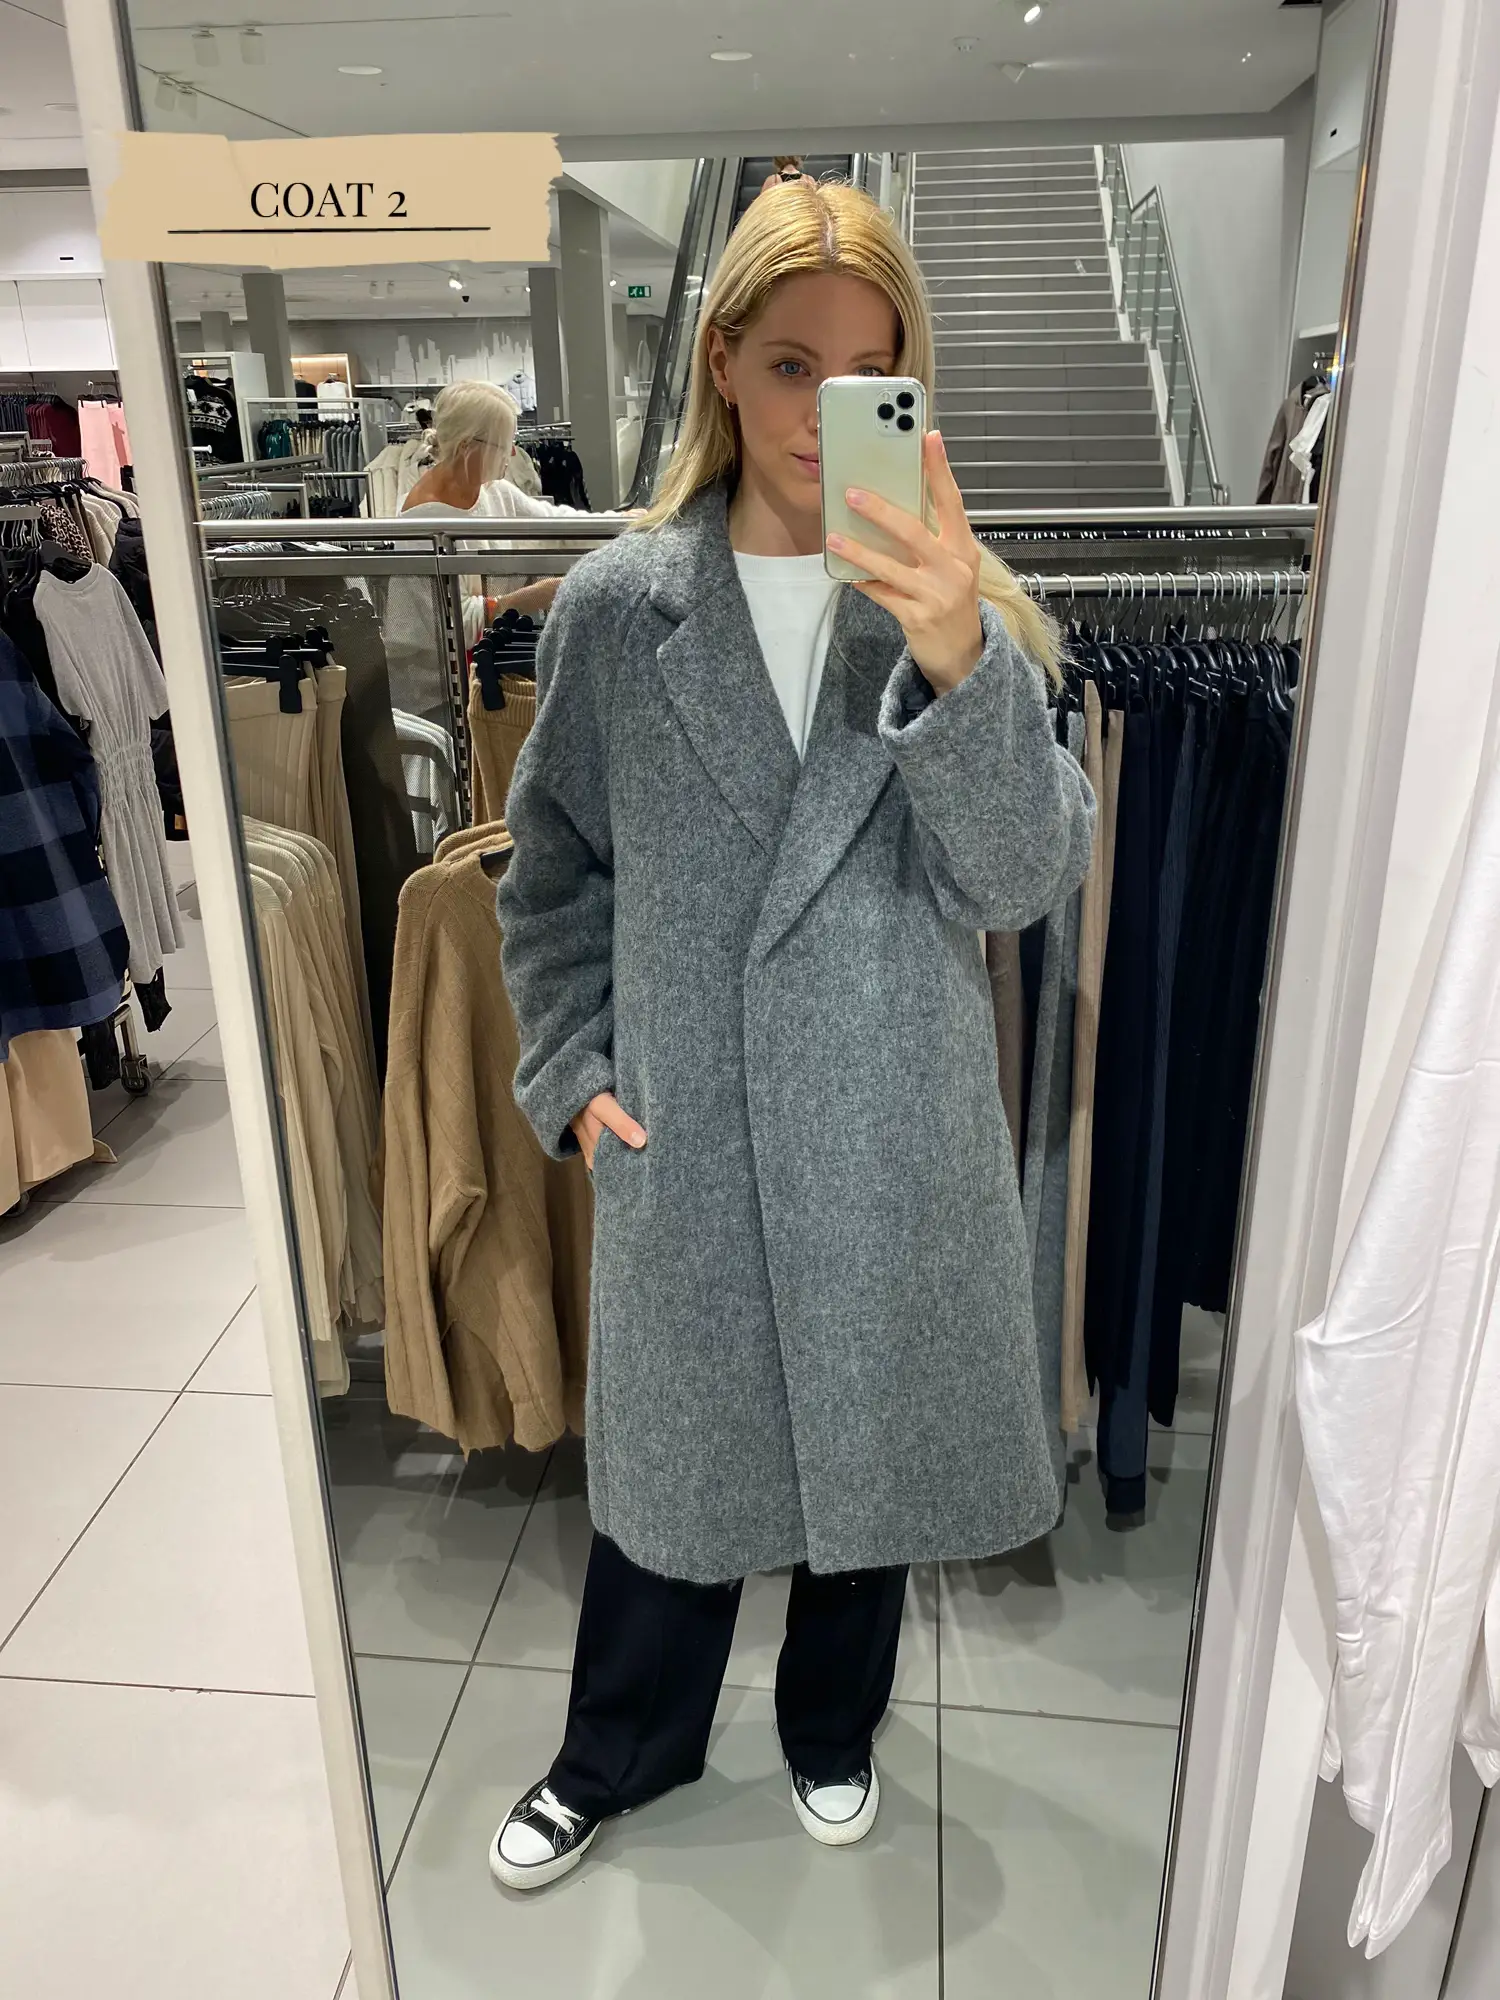 H&M Coats Try On | Gallery posted by Evgeniia | Lemon8